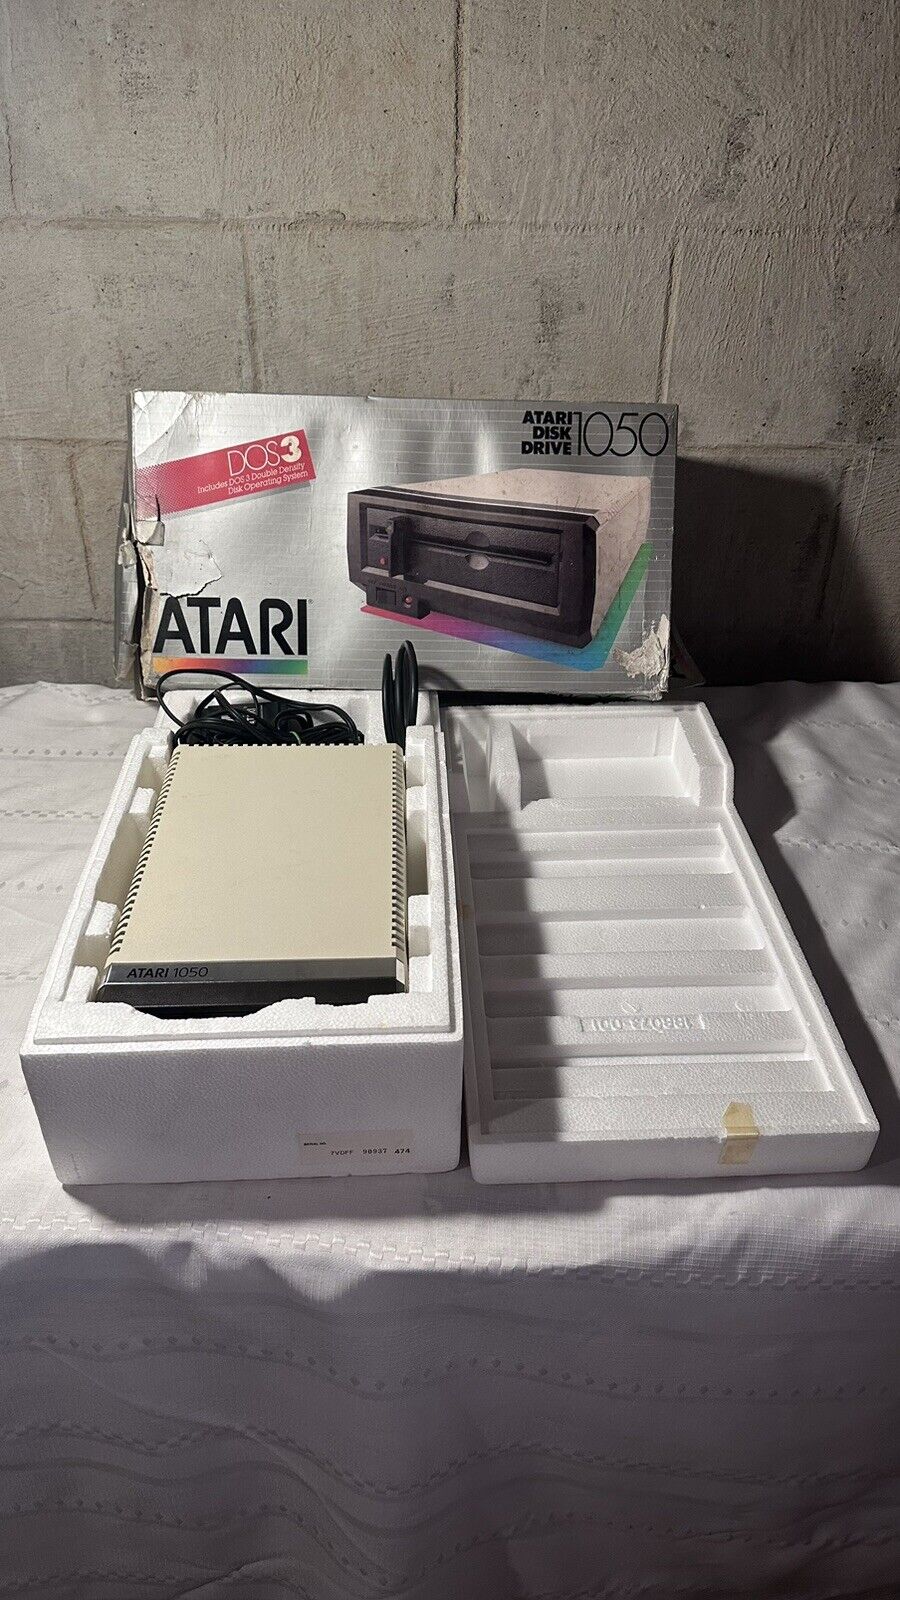 FULLY WORKING Atari 1050 Disk Drive With Box And Cables Ready To Use *Read*